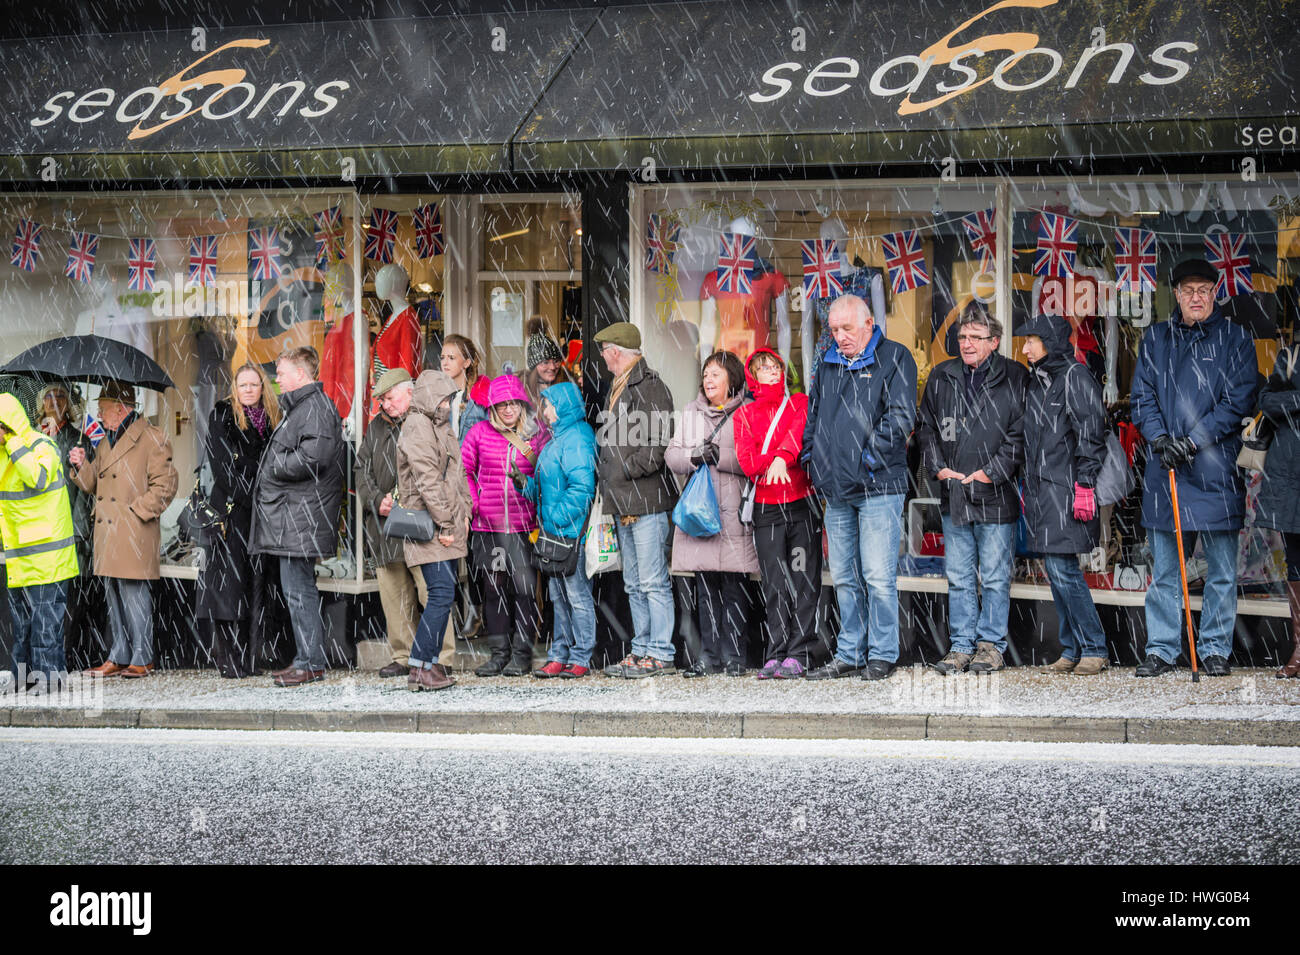 Clitheroe, UK. 21st Mar, 2017. Royal visit by HRH Prince Charles to Clitheroe to see local retailers that support the town's food festival - held later in the year. This image local residents await the arrival of the Prince despite the poor weather conditions, at Byrnes Wine Merchants. Credit: STEPHEN FLEMING/Alamy Live News Stock Photo